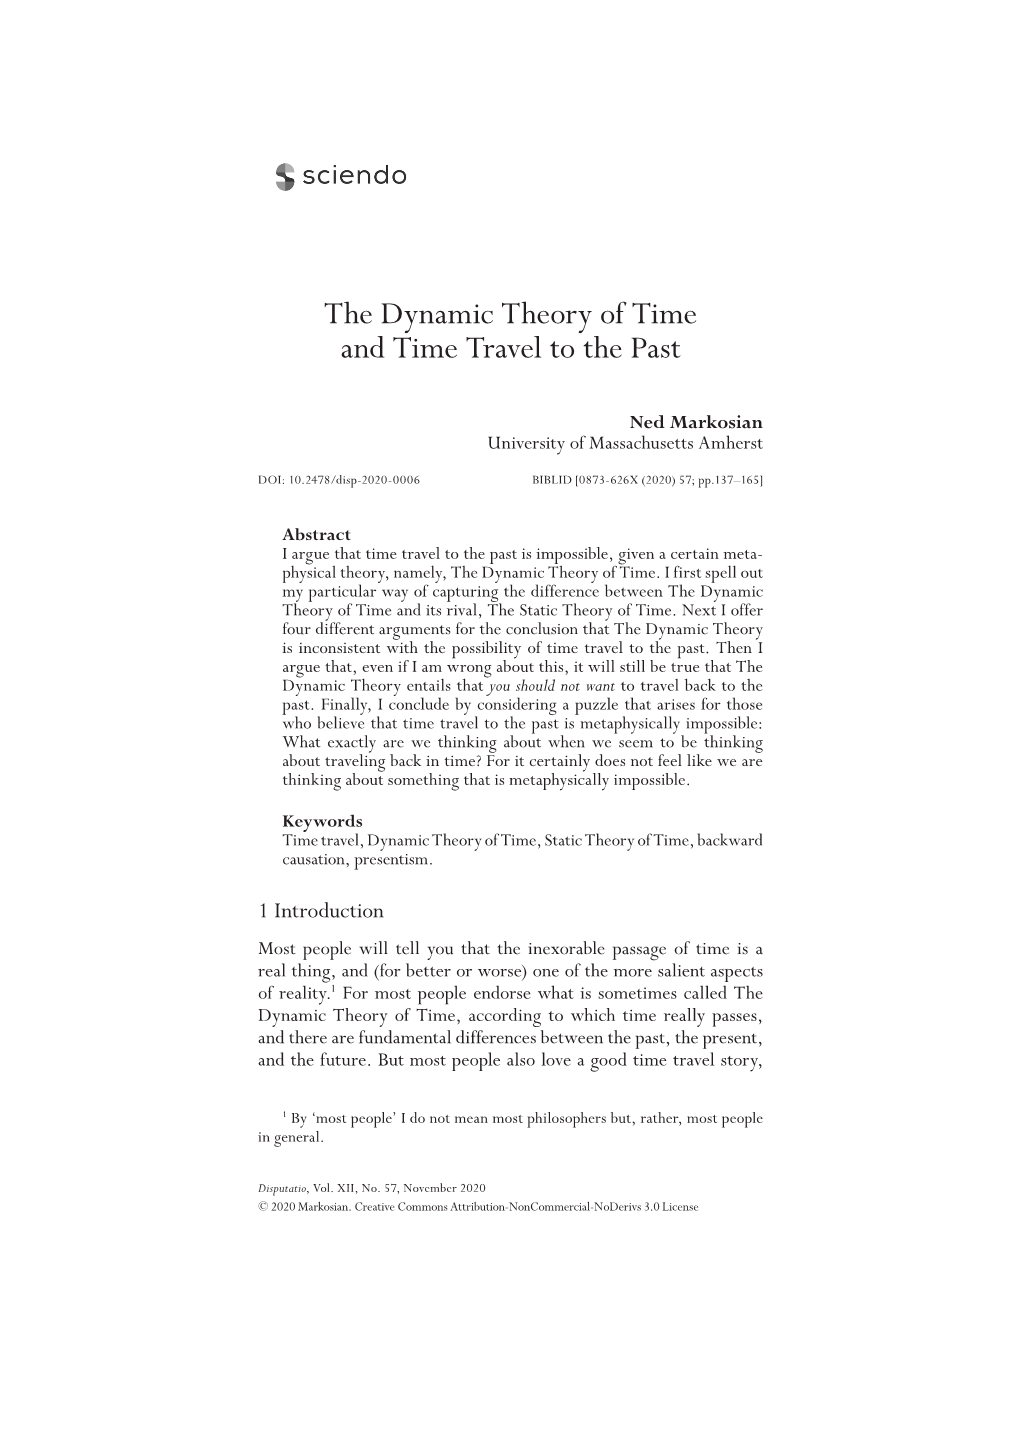 The Dynamic Theory of Time and Time Travel to the Past